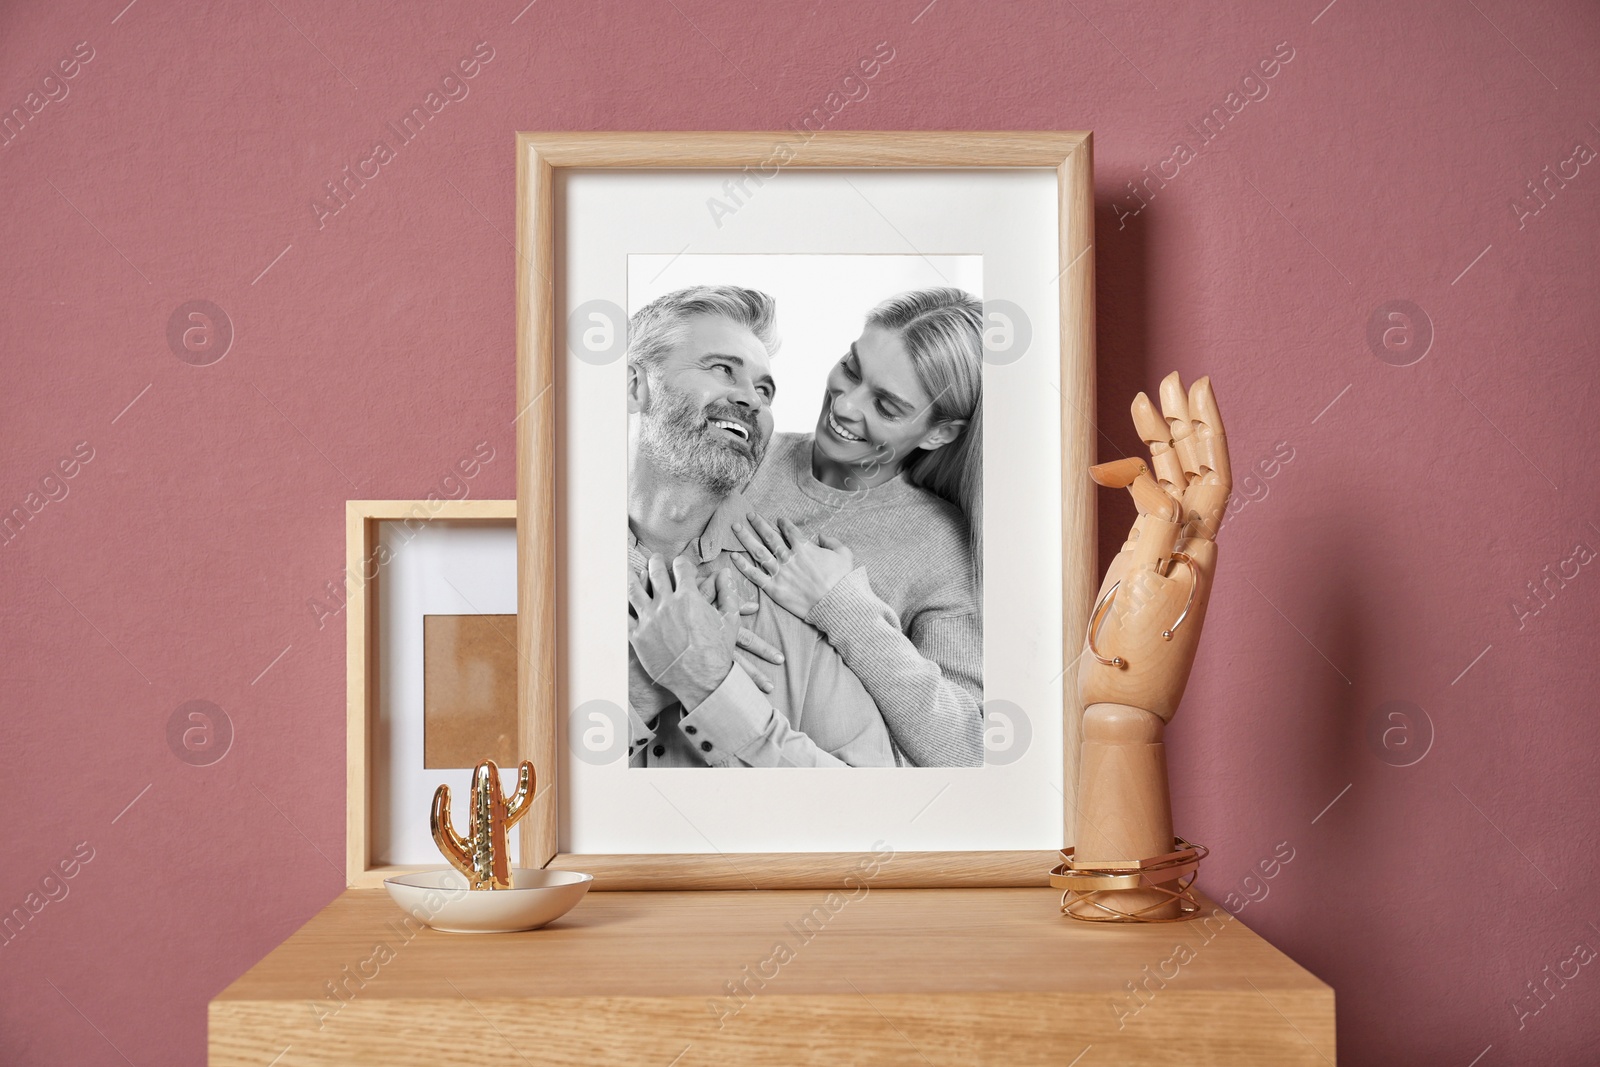 Image of Black and white family portrait of man and woman in photo frame on table near color wall